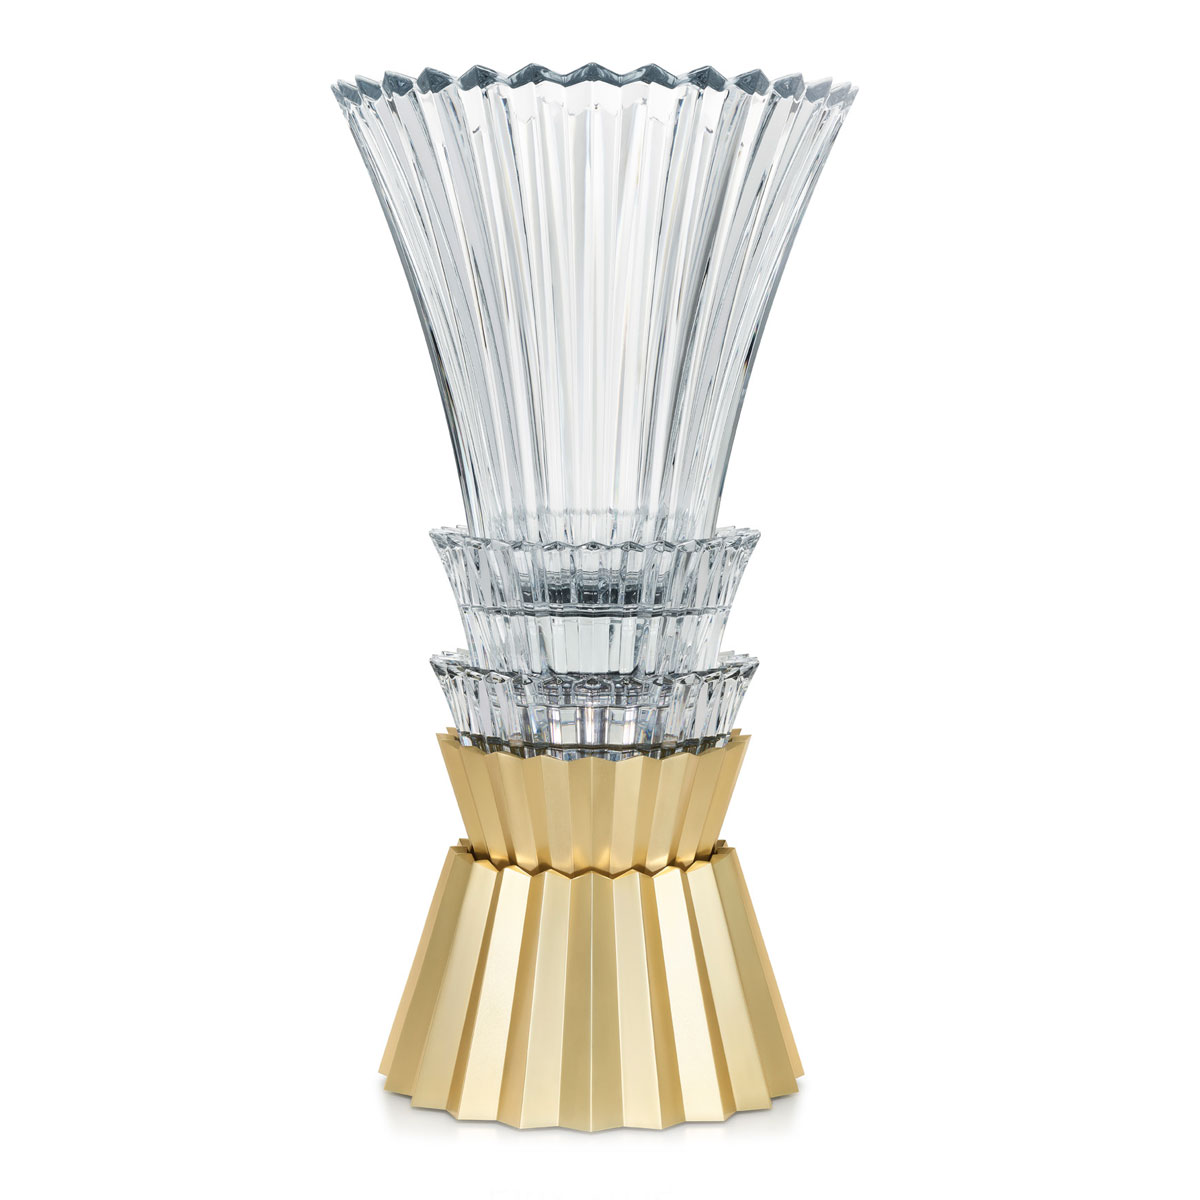 Baccarat Vase Collection | Cashs of Ireland